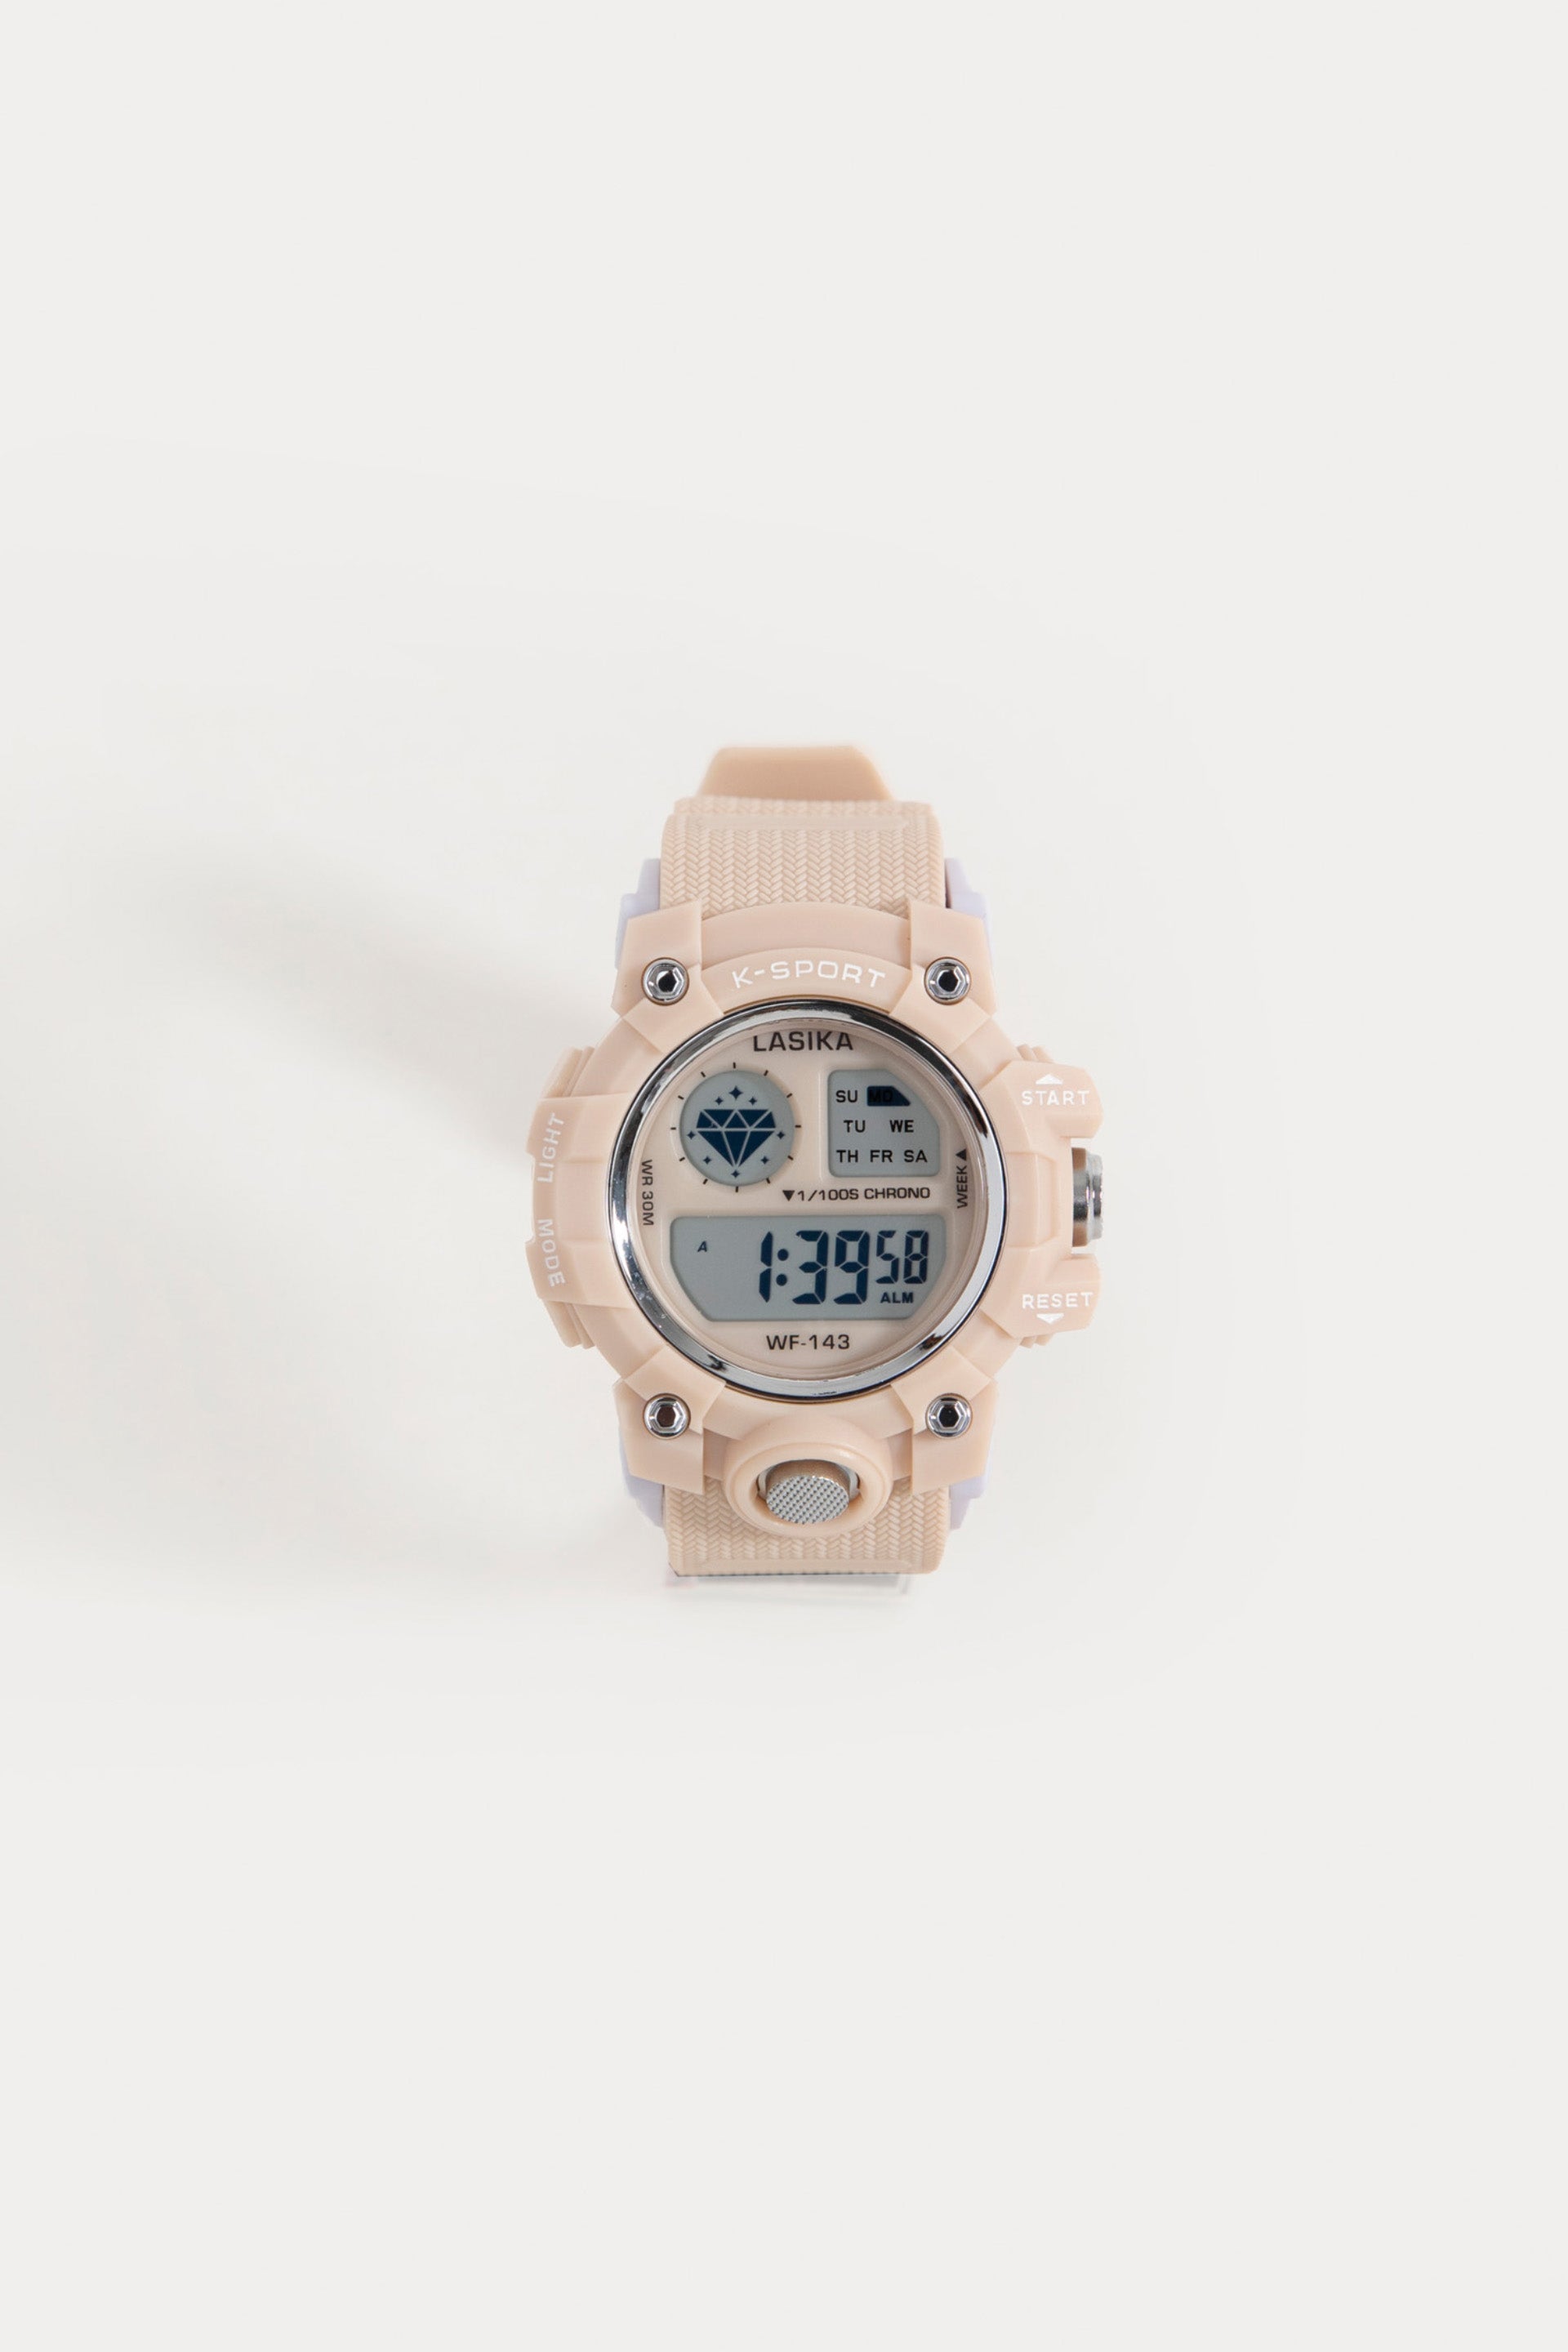 urban outfitters Swatch Home Stripe Home Watch | Urban Outfitters | ShopLook